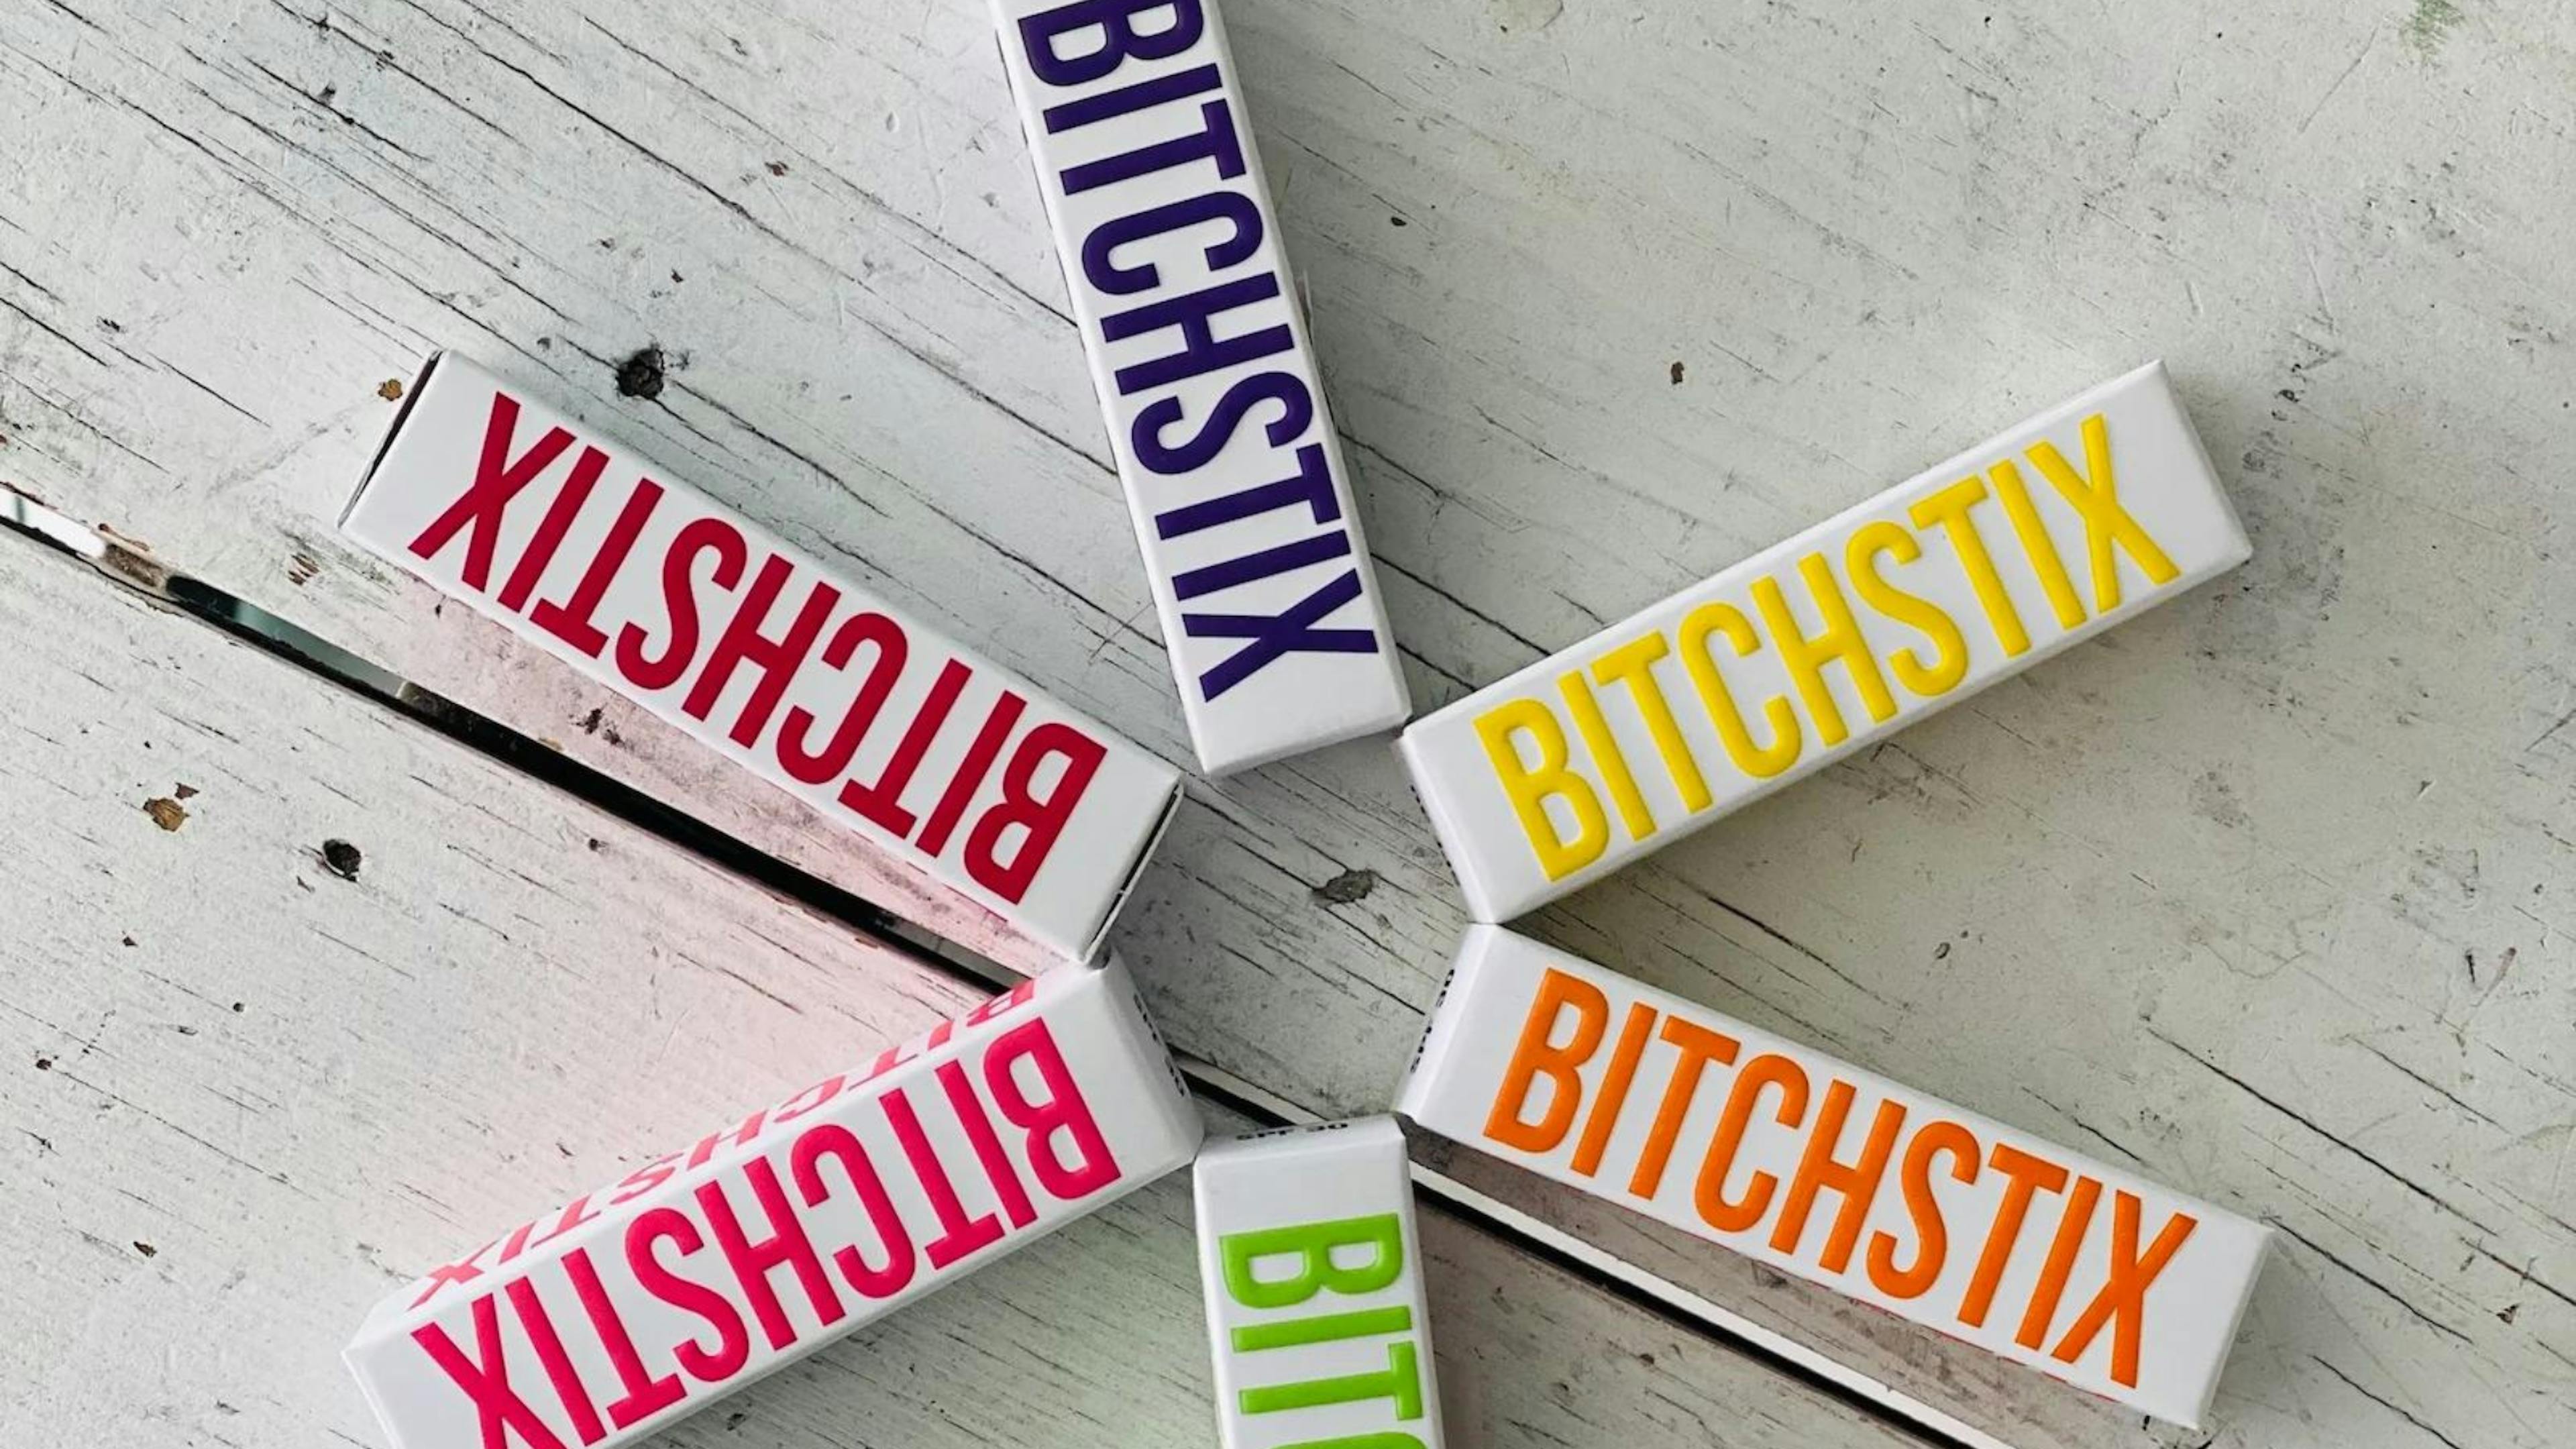 bitchstix product imagery